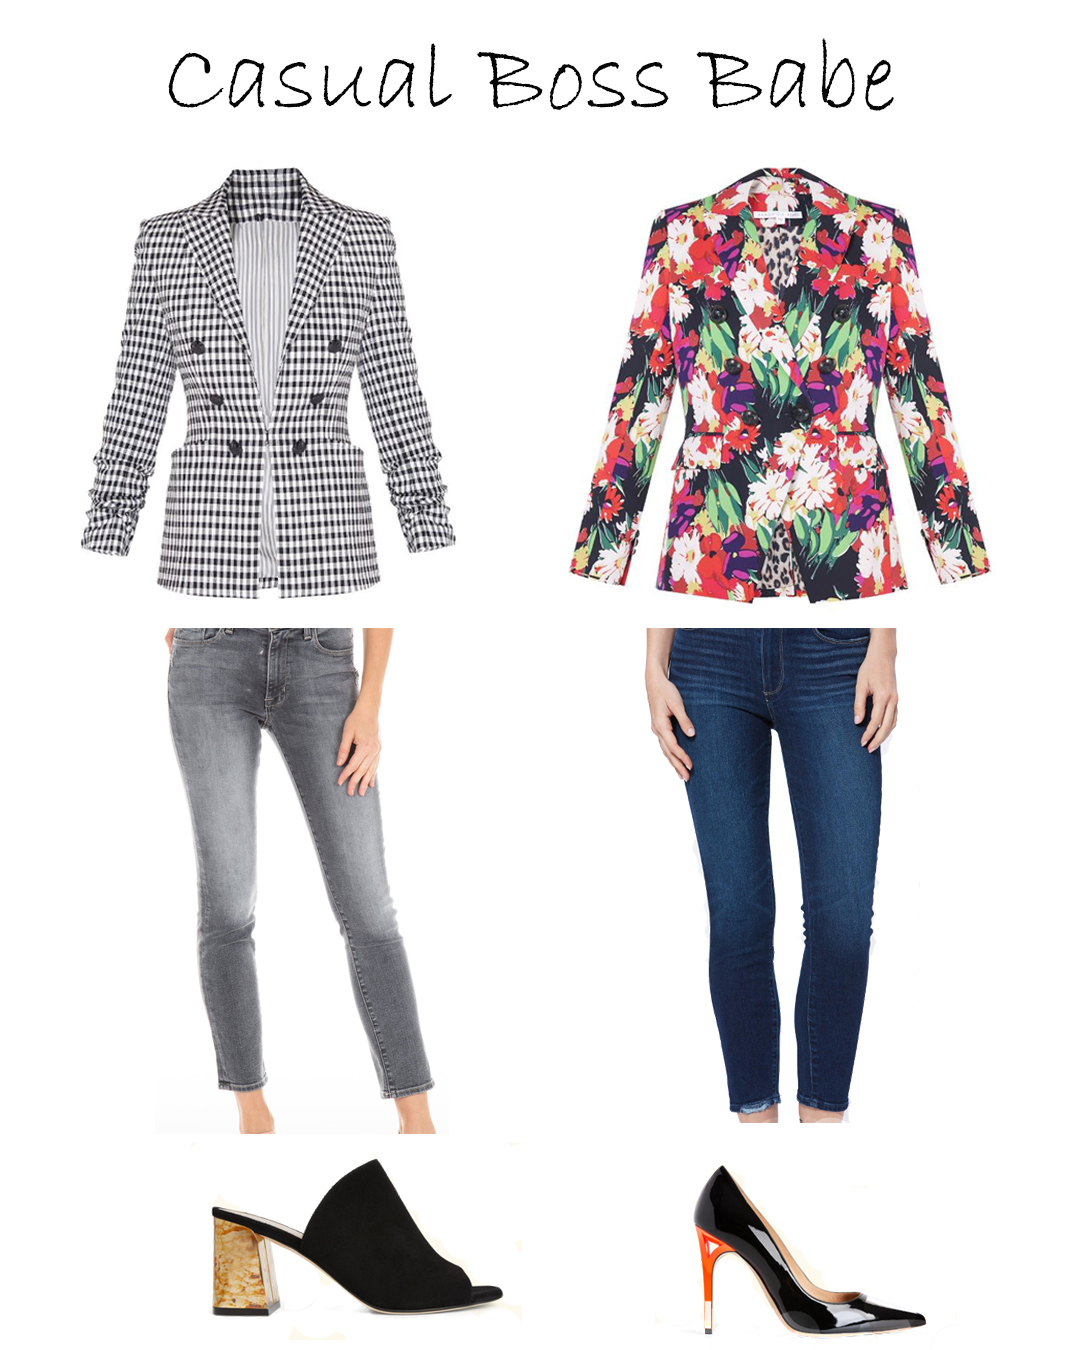 Style Tips for Working in a Casual Office